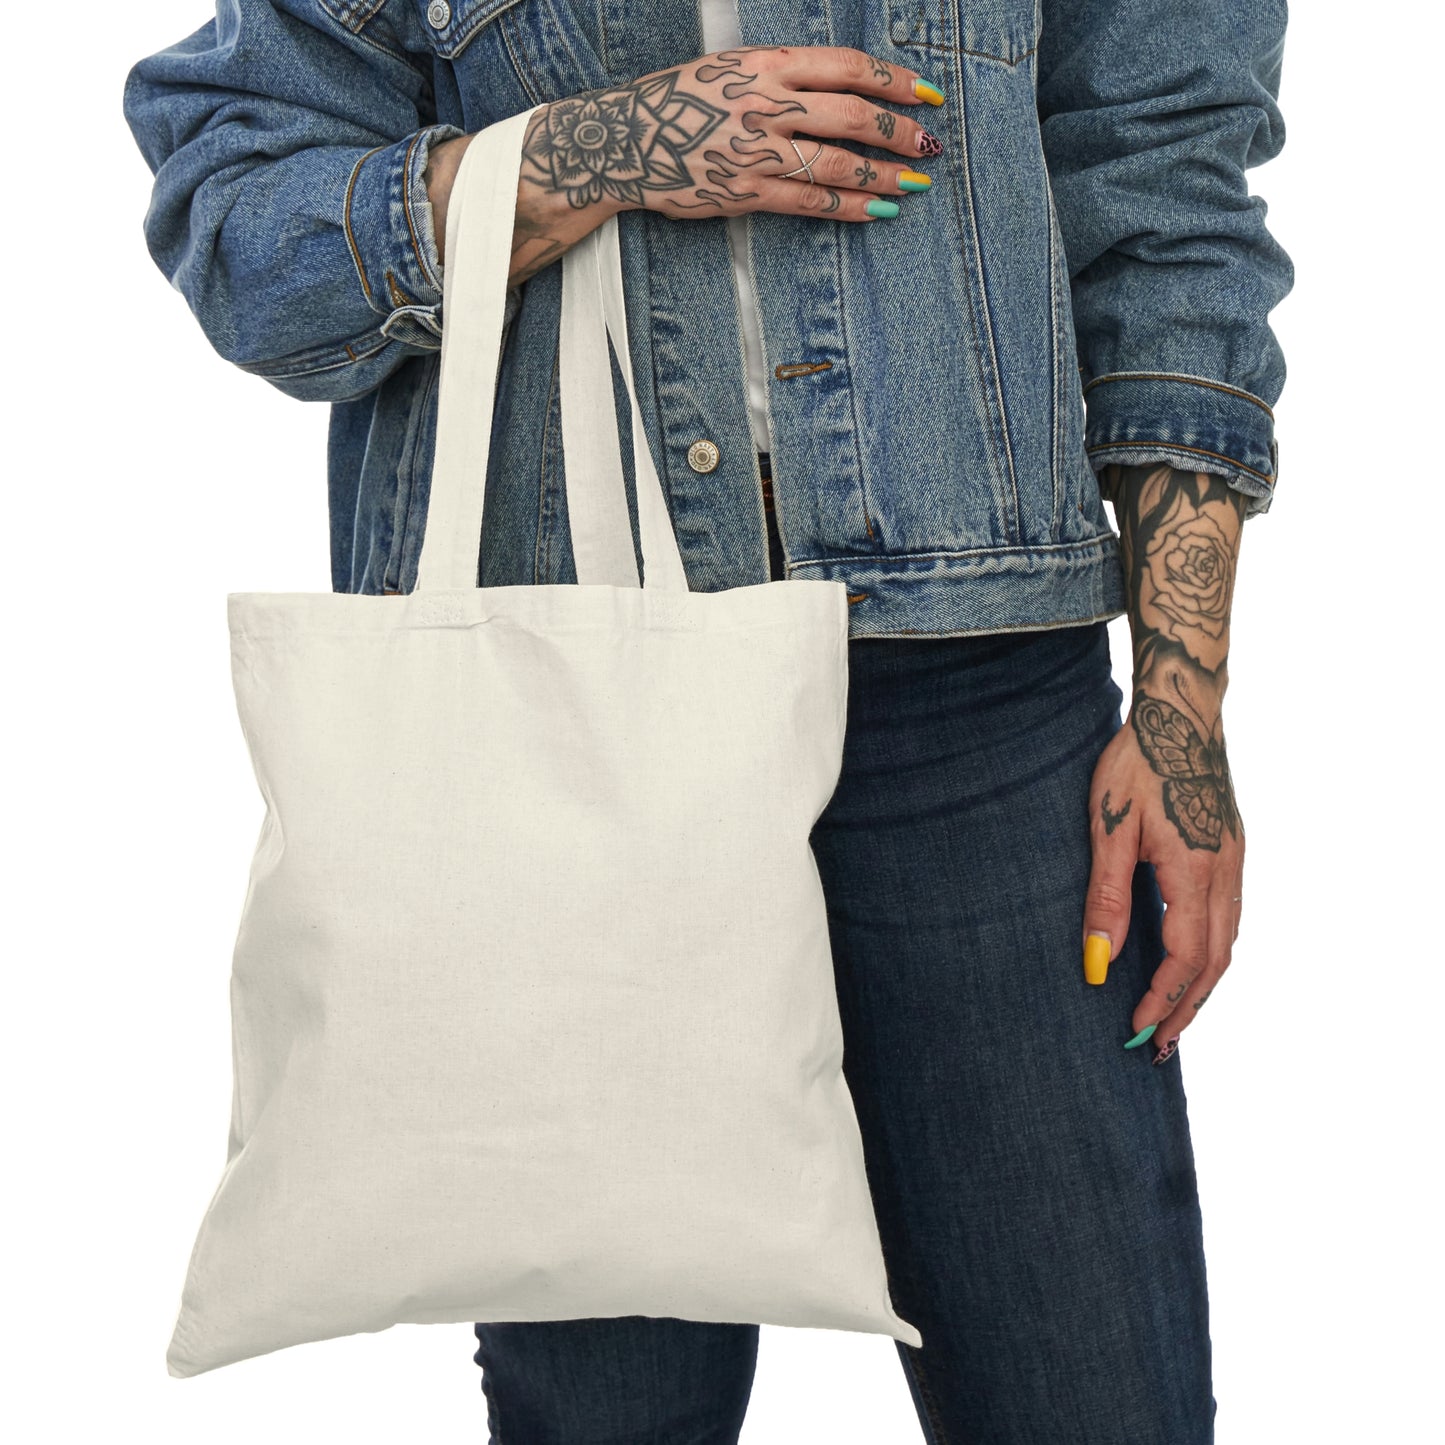 As Far As The I Can See - Natural Tote Bag